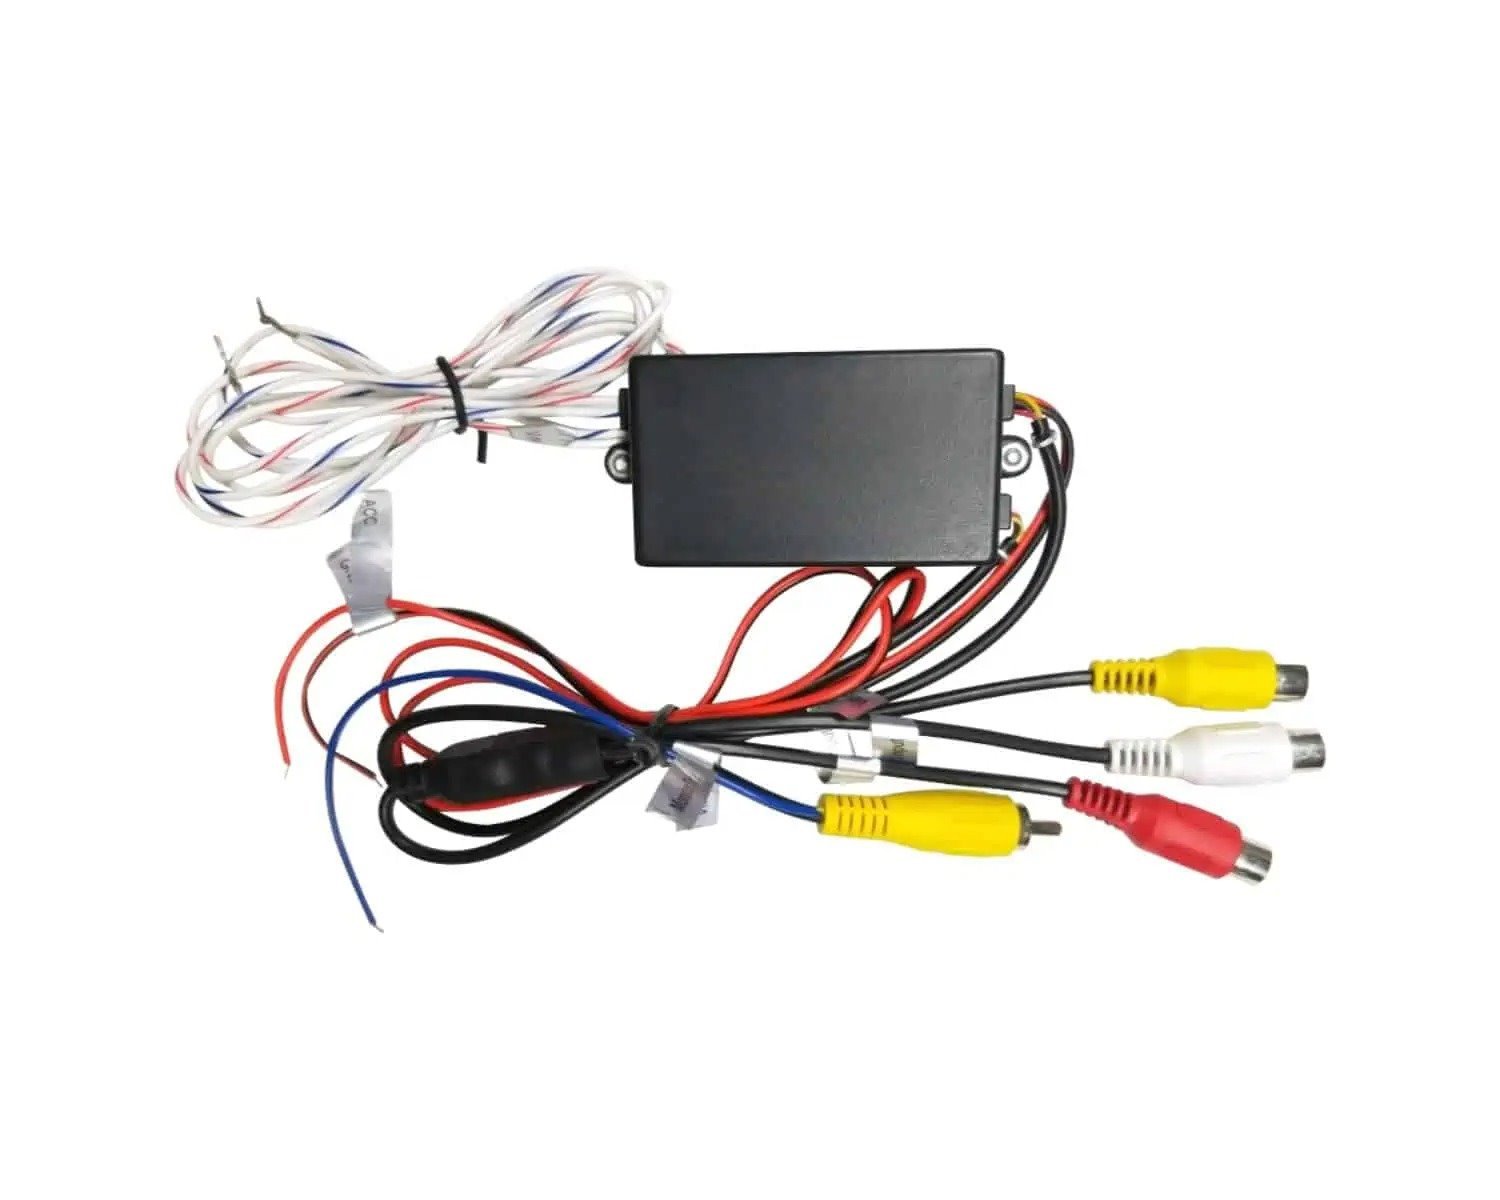 CM-SWITCHER 3-Way Video Switching System, For In-Dash Multimedia